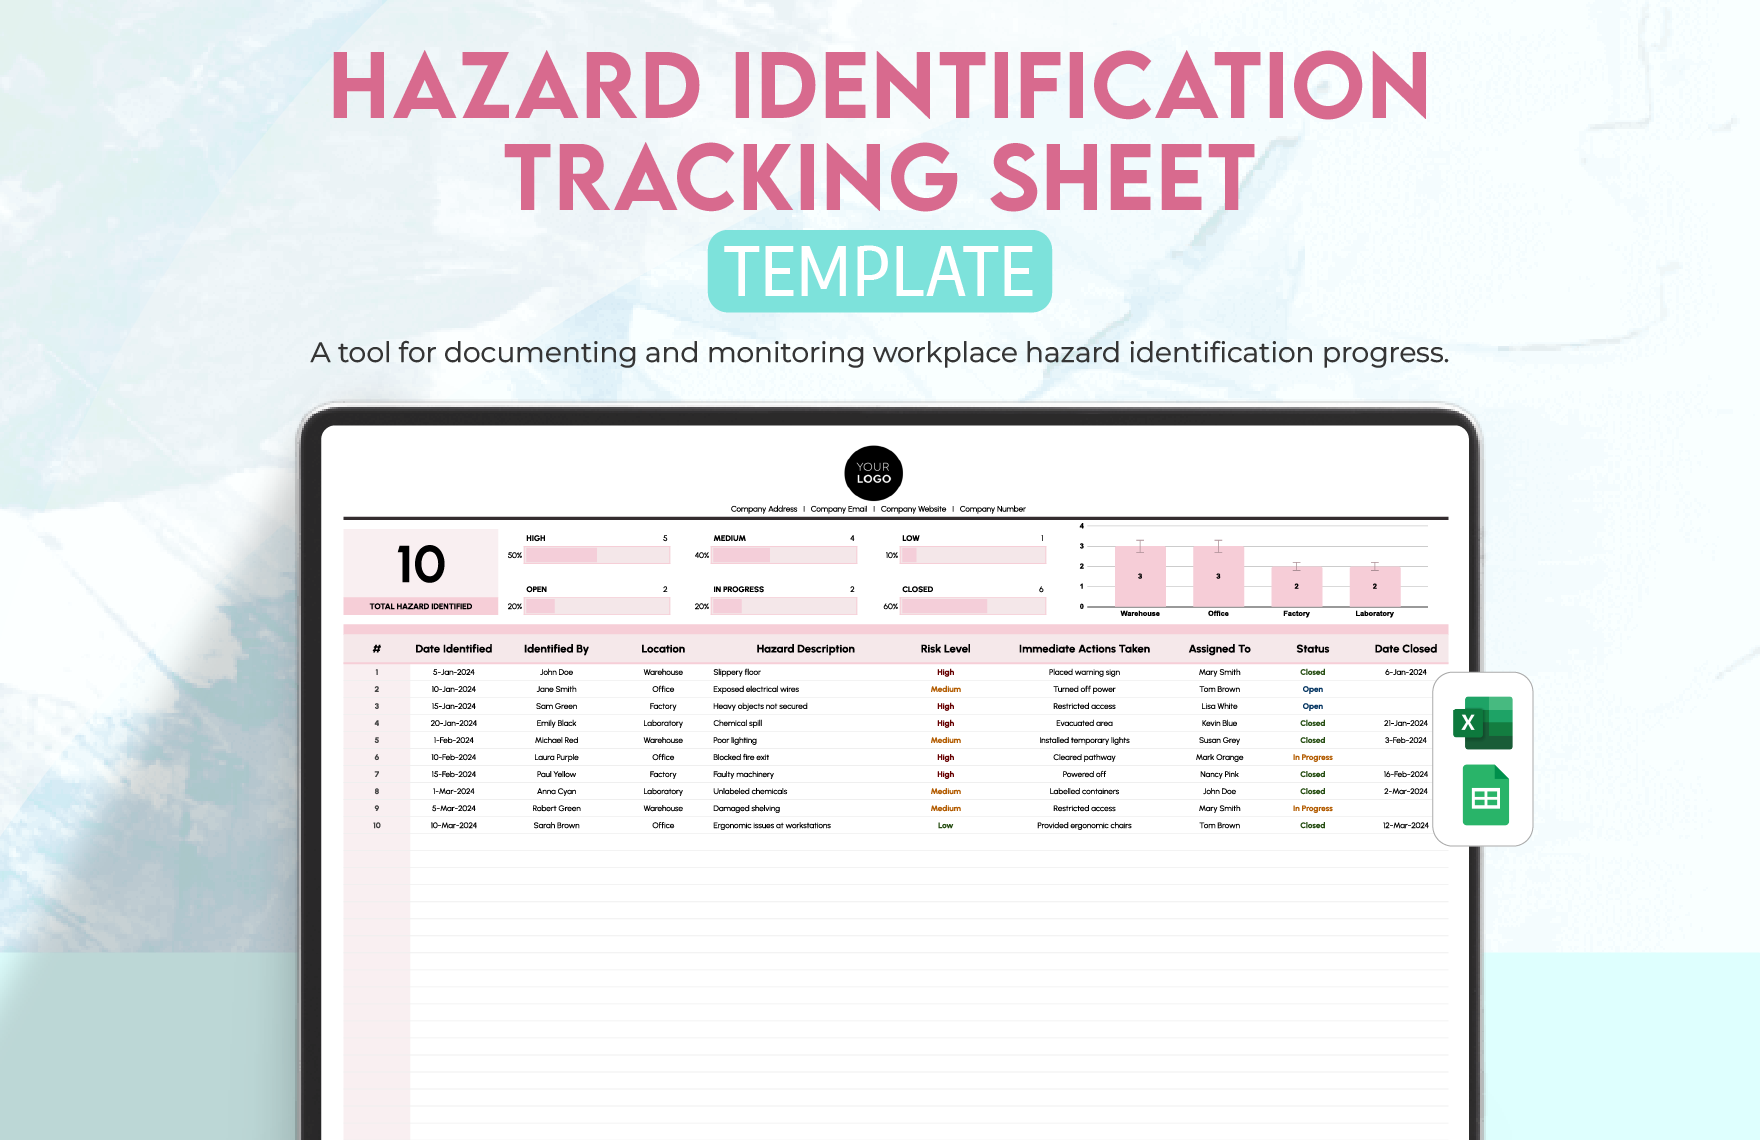 Hazard Identification Tracking Sheet Template in Excel, Google Sheets